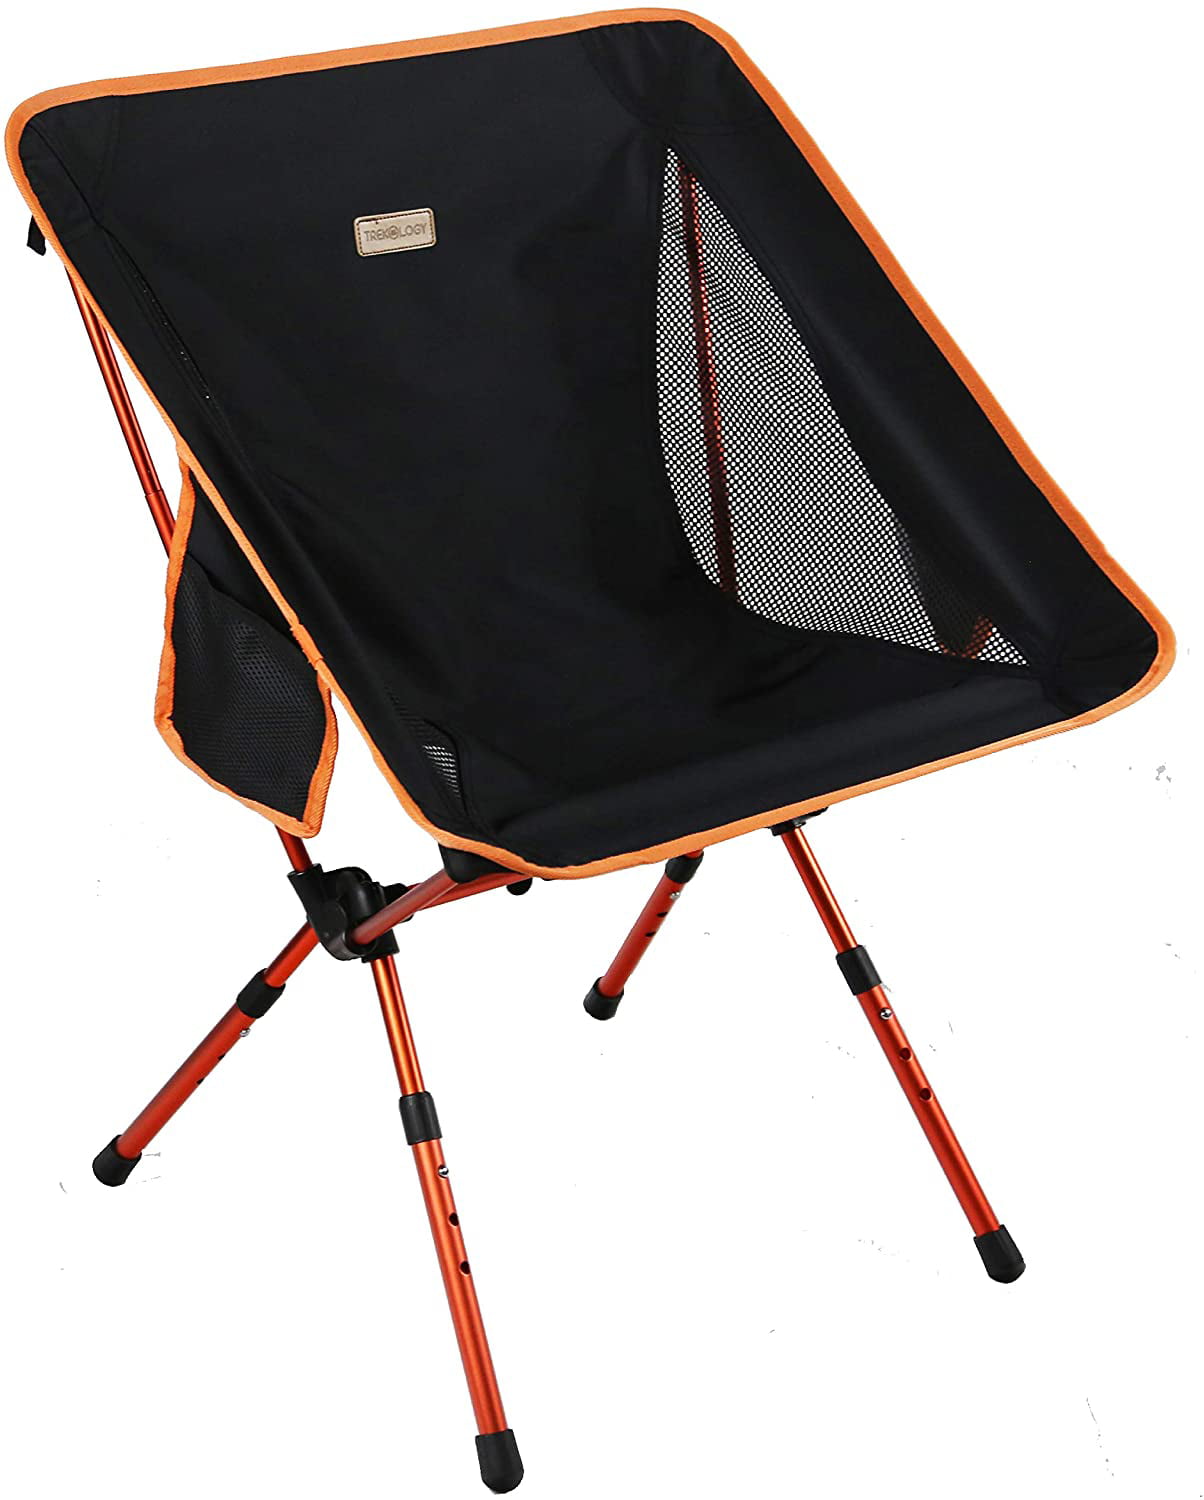 DecorX Portable Camping Chair - Compact Ultralight Folding Backpacking